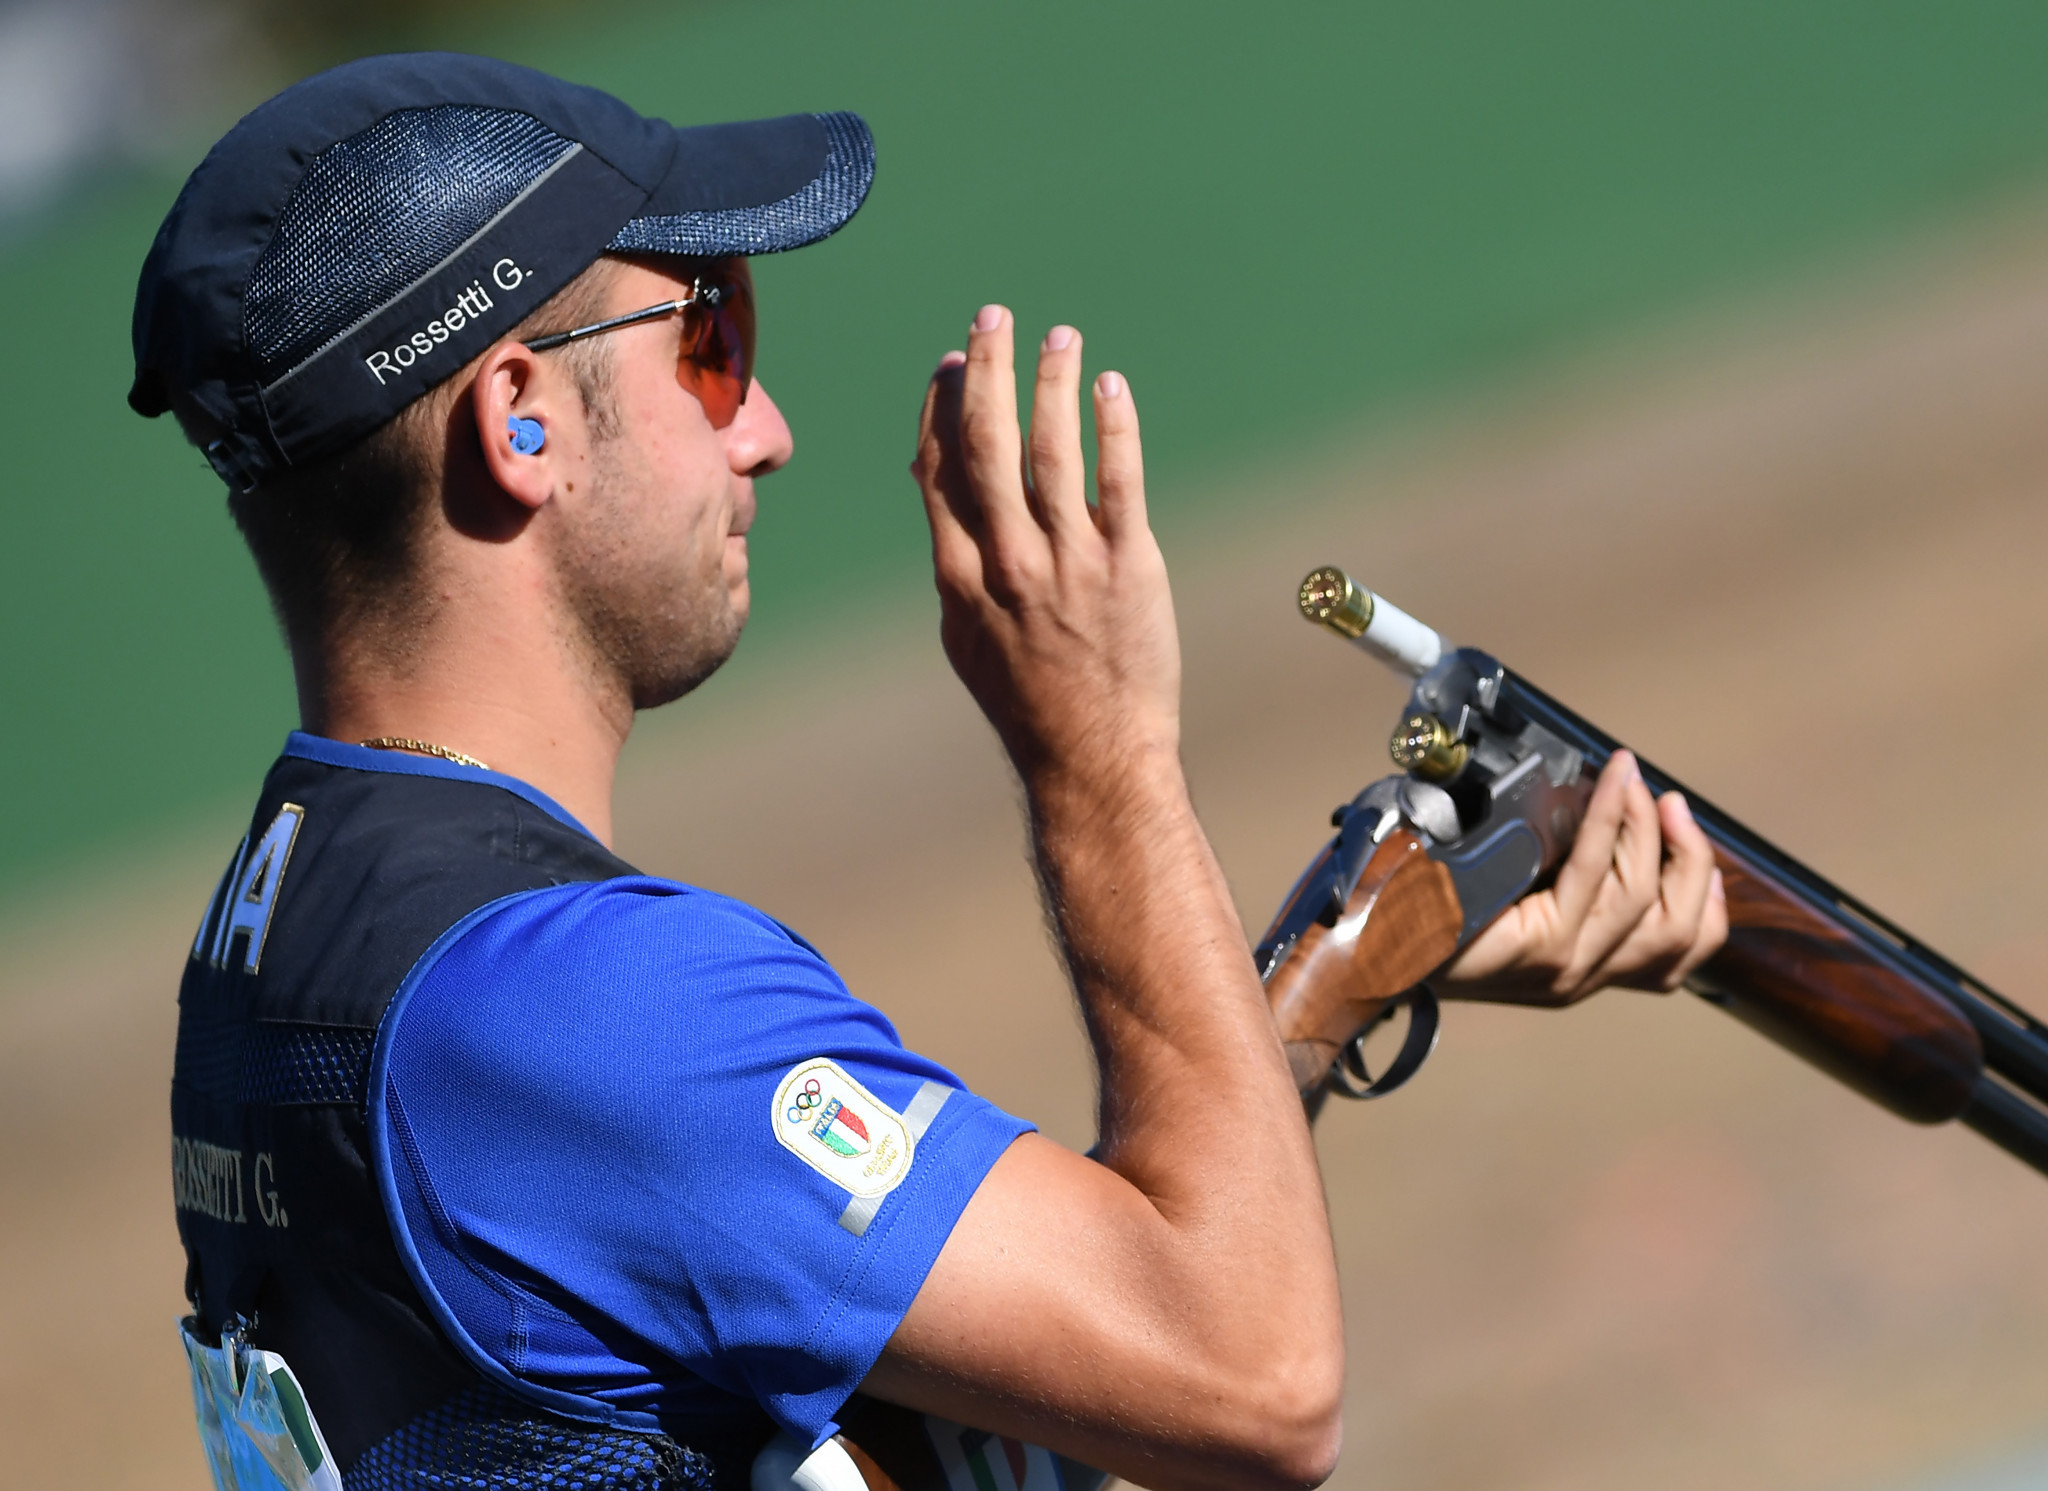 Double team skeet success for hosts Italy at ISSF Shotgun World Cup